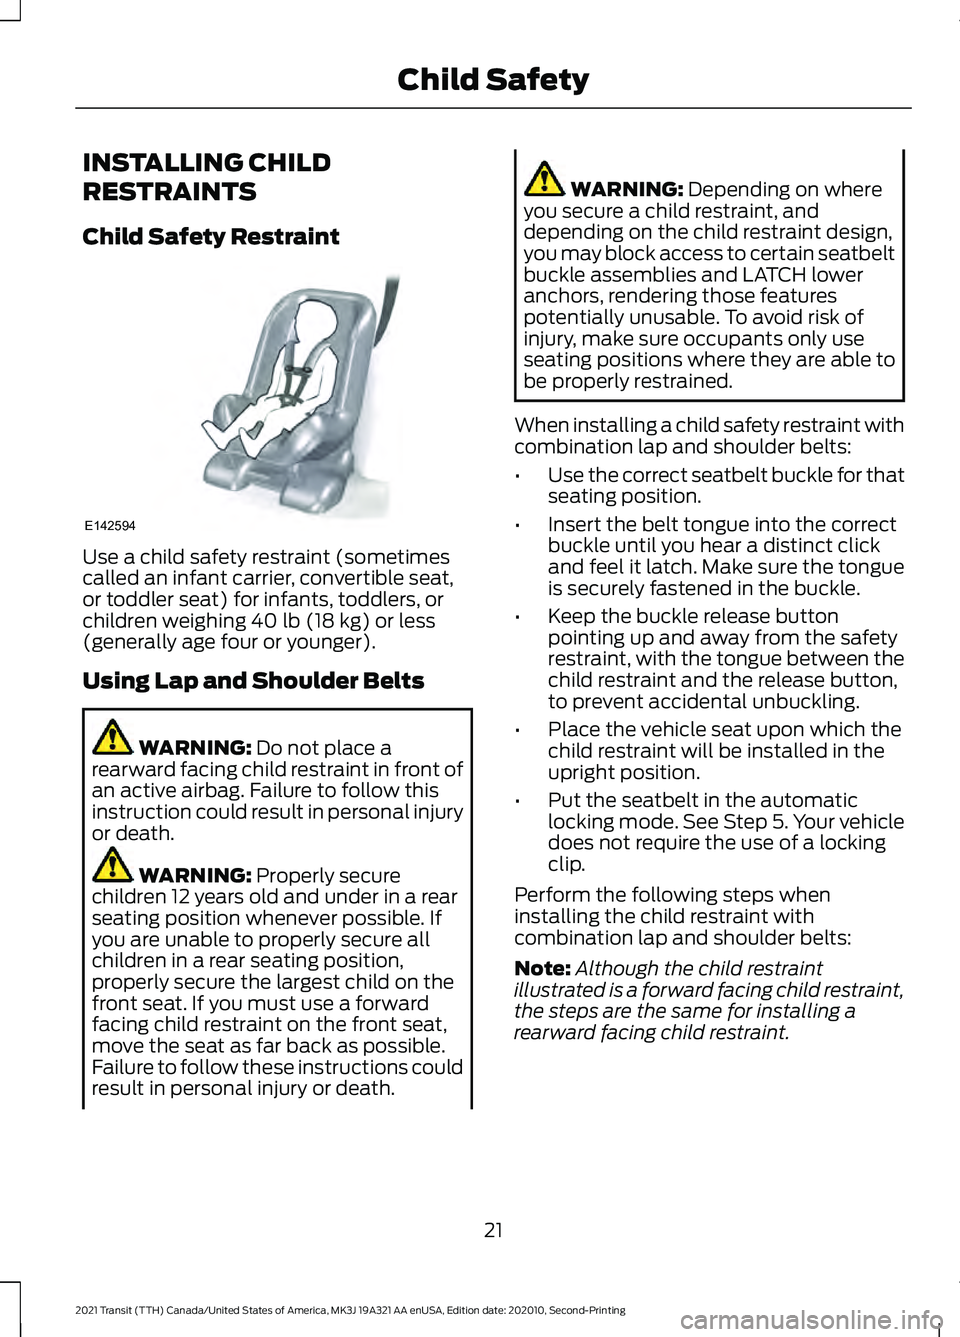 FORD TRANSIT 2021  Owners Manual INSTALLING CHILD
RESTRAINTS
Child Safety Restraint
Use a child safety restraint (sometimes
called an infant carrier, convertible seat,
or toddler seat) for infants, toddlers, or
children weighing 40 l